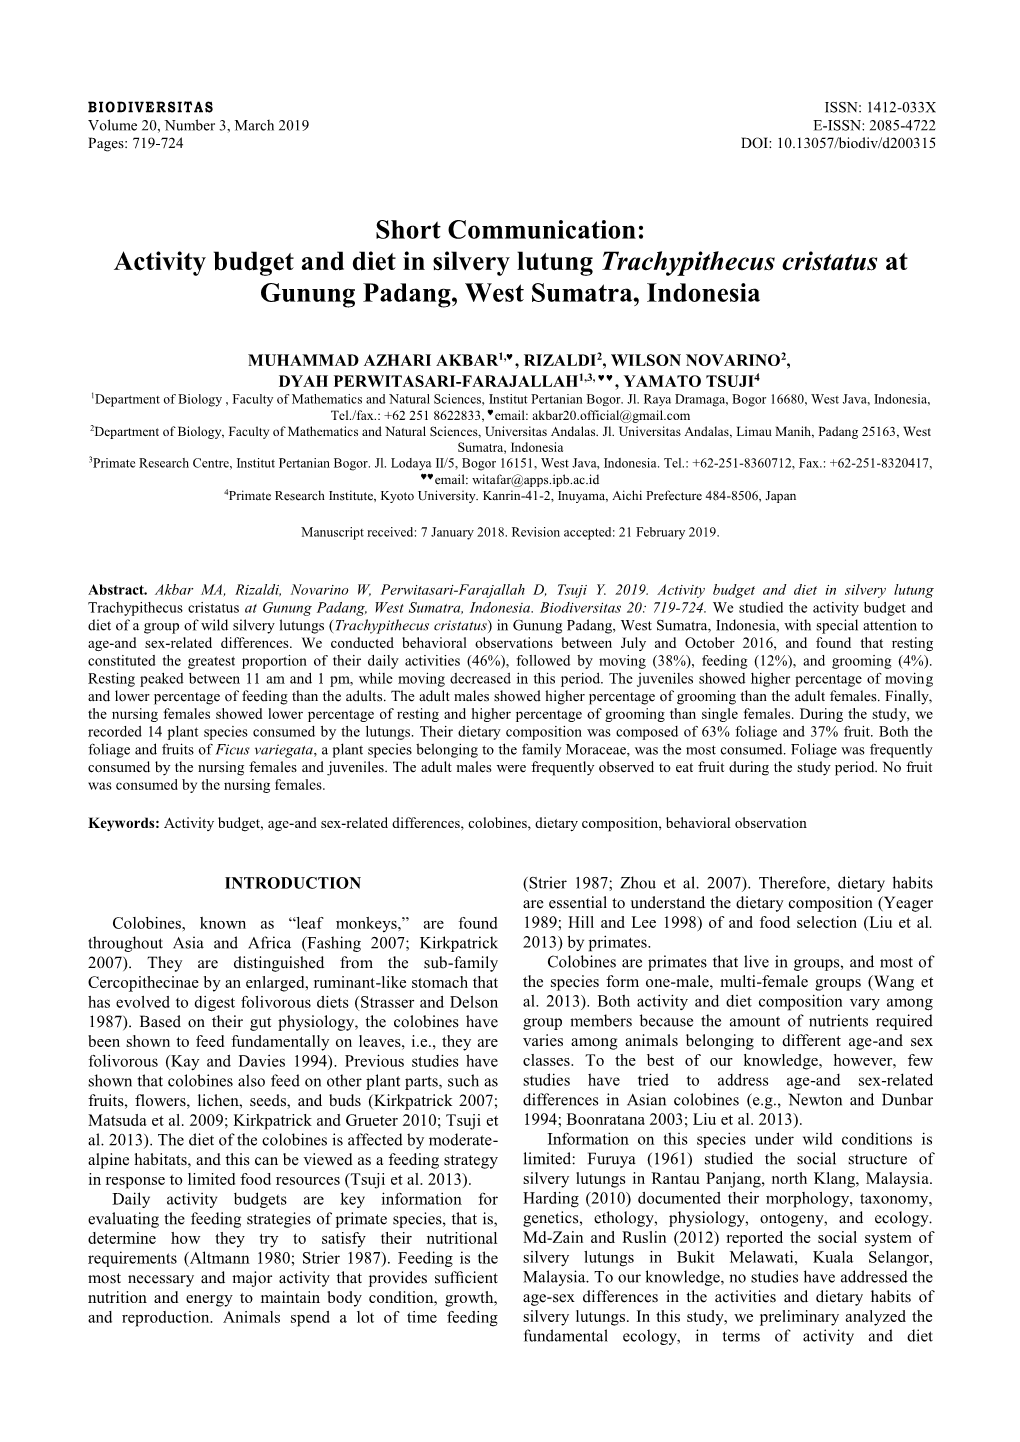 Activity Budget and Diet in Silvery Lutung Trachypithecus Cristatus at Gunung Padang, West Sumatra, Indonesia